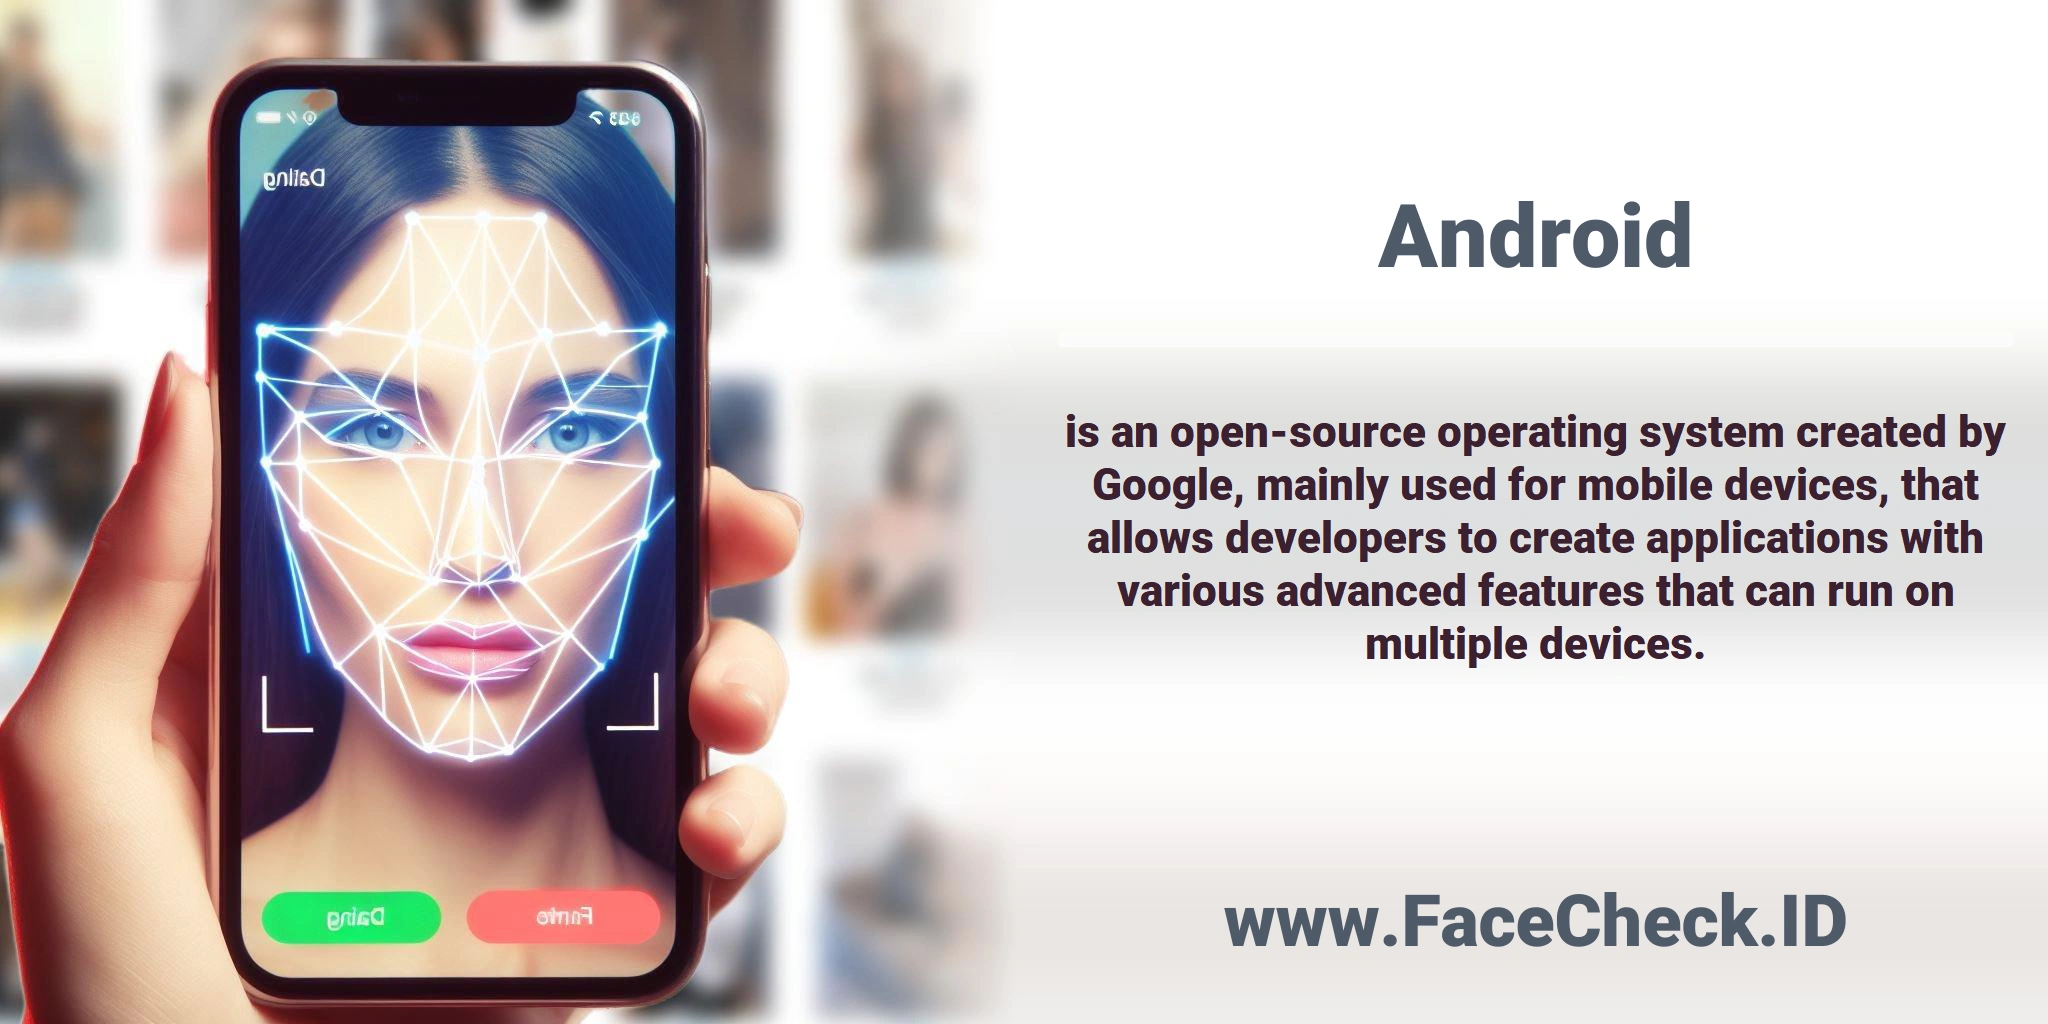 <b>Android</b> is an open-source operating system created by Google, mainly used for mobile devices, that allows developers to create applications with various advanced features that can run on multiple devices.